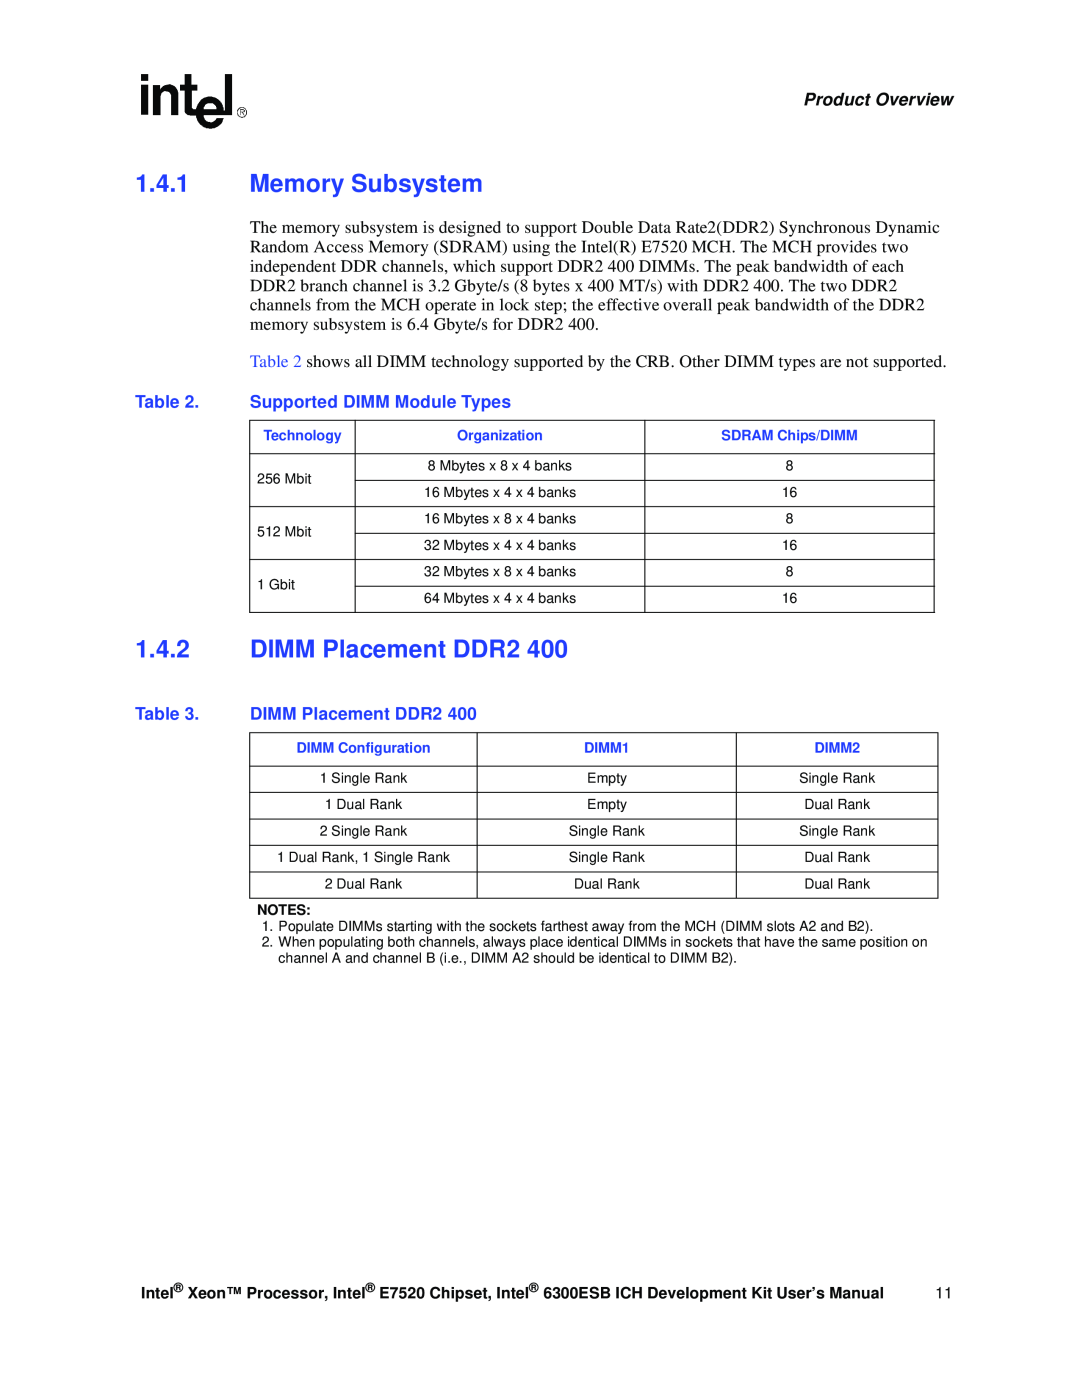 Intel 6300ESB ICH, Xeon user manual Memory Subsystem, DIMM Placement DDR2, Supported DIMM Module Types, Product Overview 